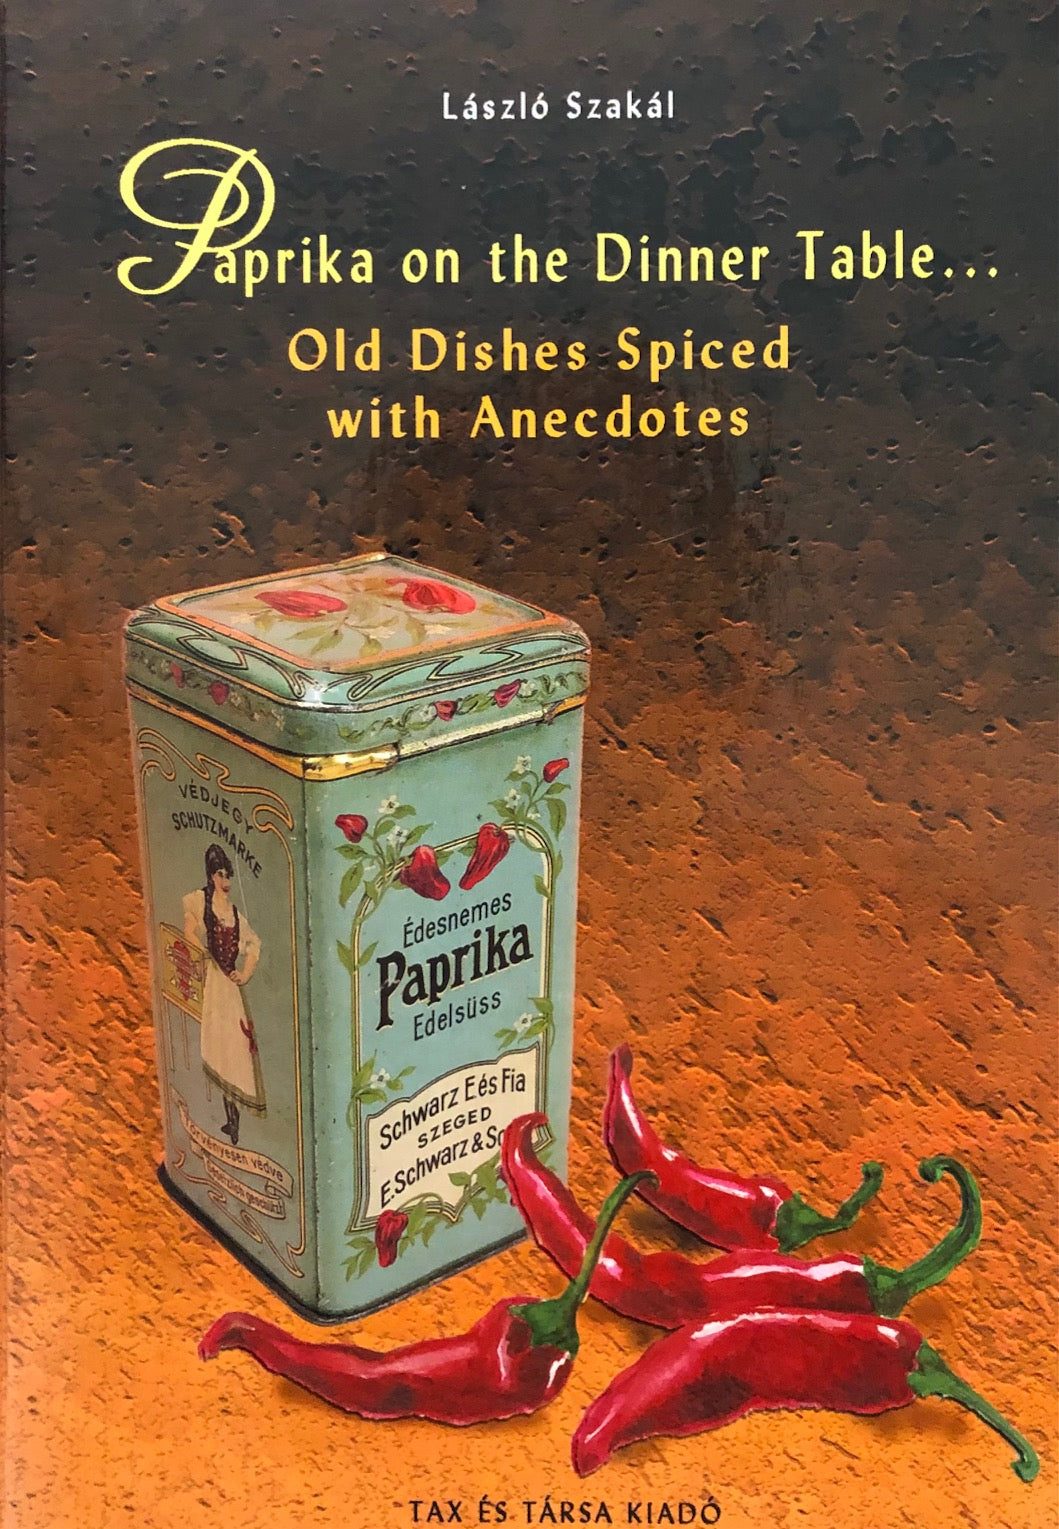 (Hungarian) Laszlo Szakal. Paprika on the Dinner Table...Old Dishes Spiced with Anecdotes.